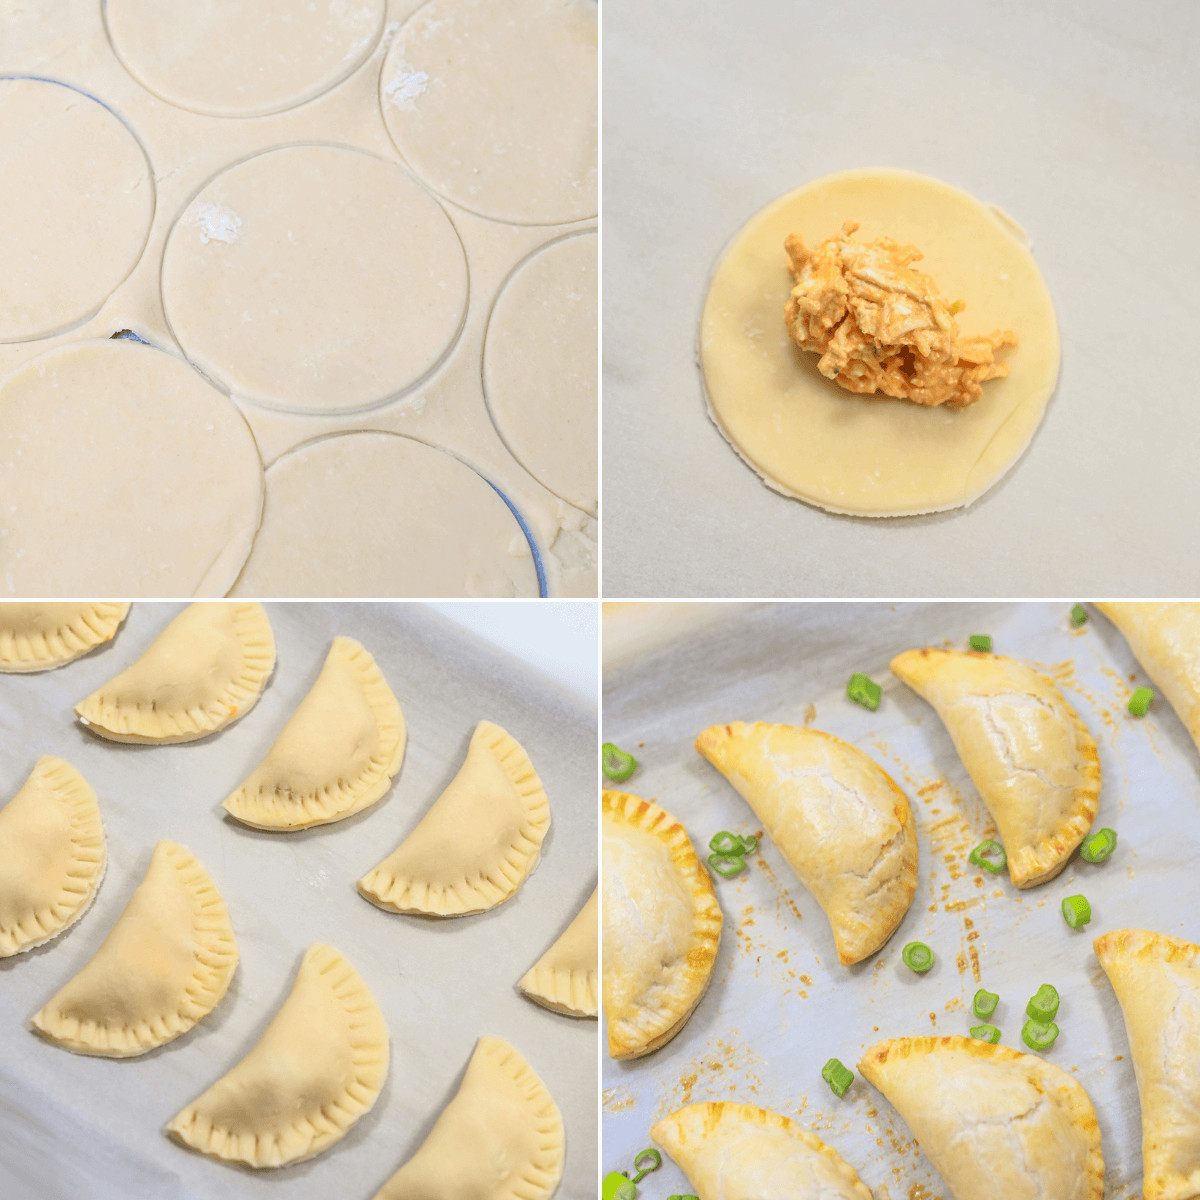 Learn how to make delicious chicken empanadas with this series of instructional photos.